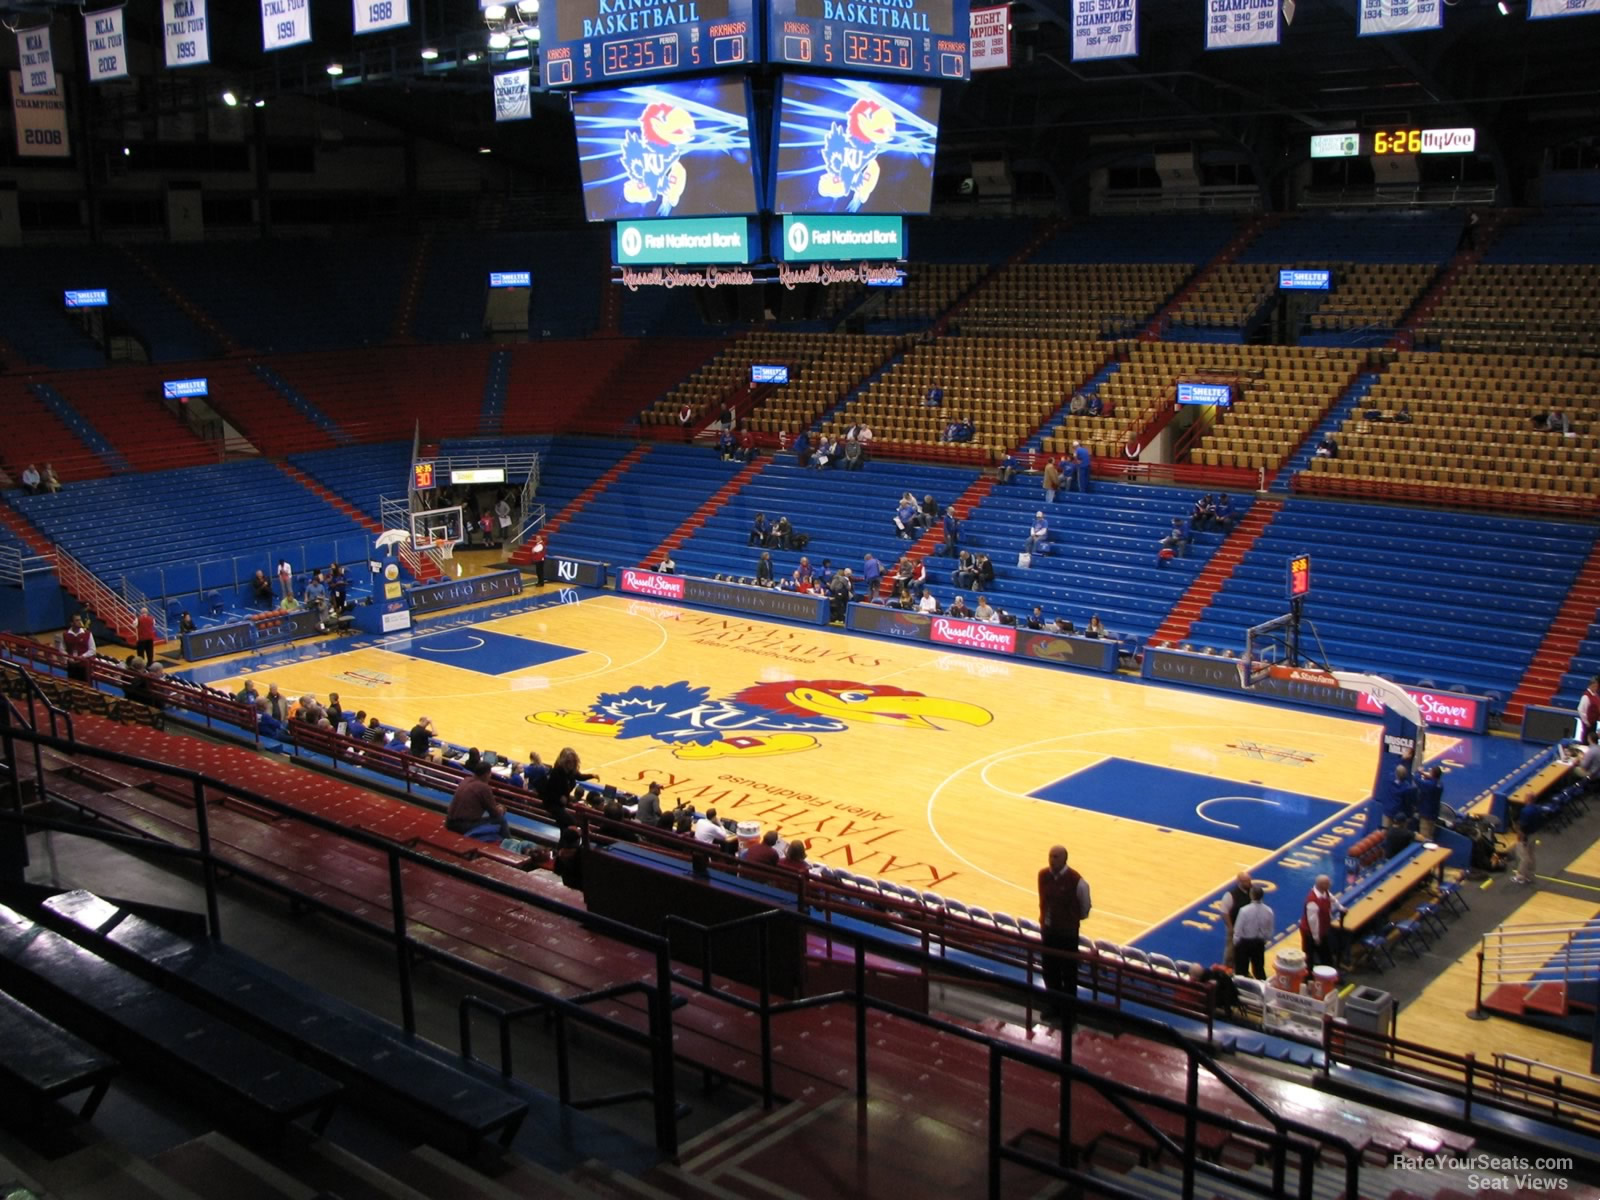 section 14, row 18 seat view  - allen fieldhouse